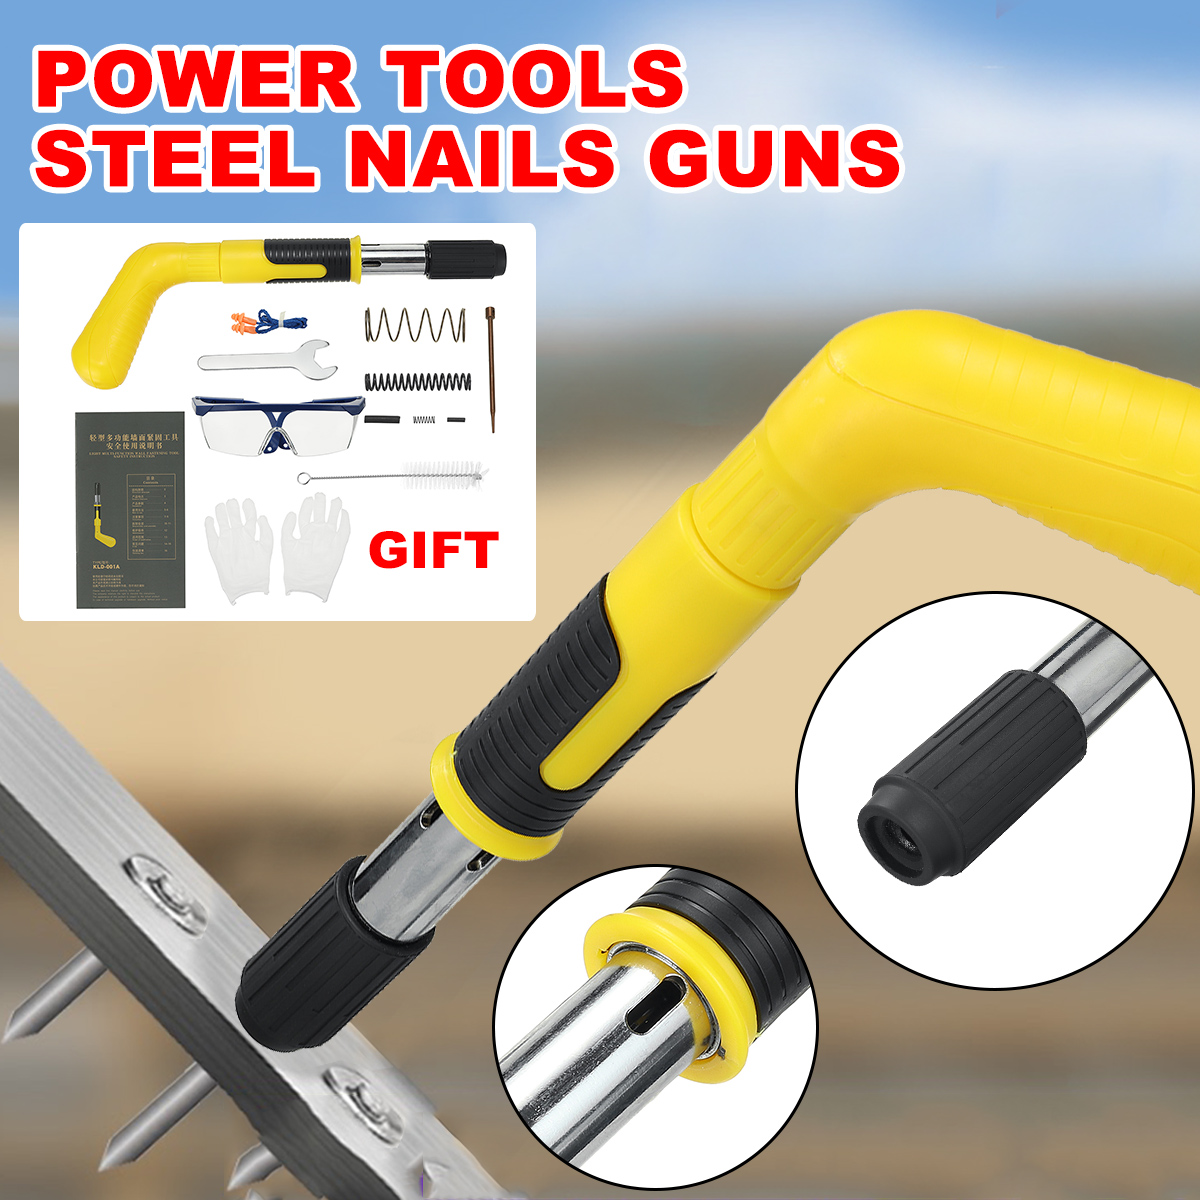 Electric-Nail-Guns-Electric-Staple-Straight--Rechargeable-Automatic-25mm-Special-Use-Wood-Working-To-1900733-2